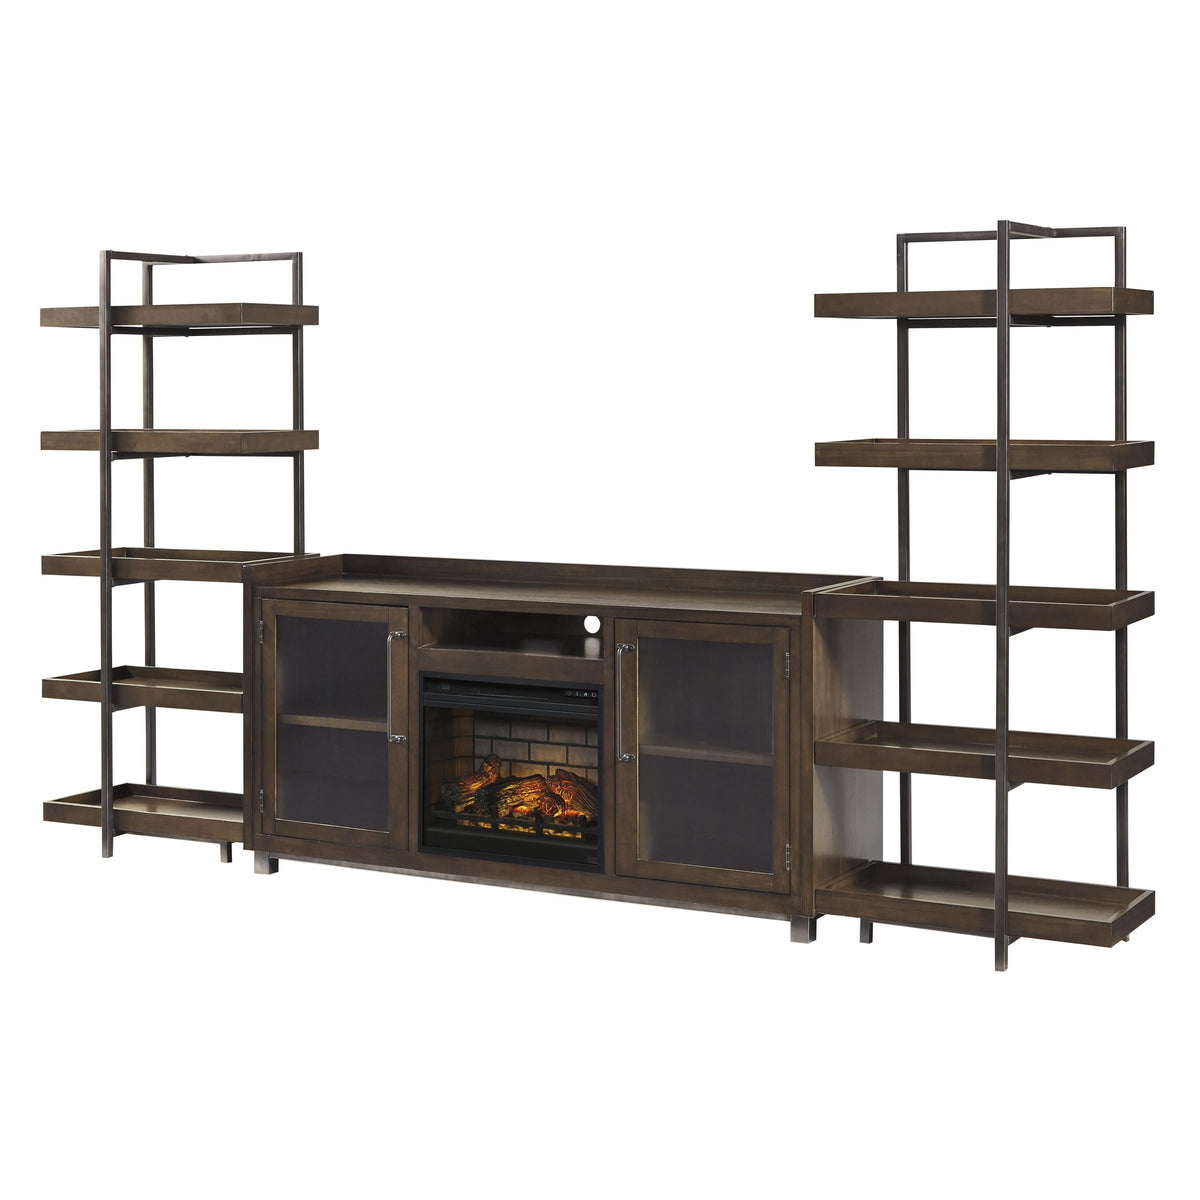 Signature Design by Ashley Starmore W633W6 3 pc Wall Unit with Electric Fireplace